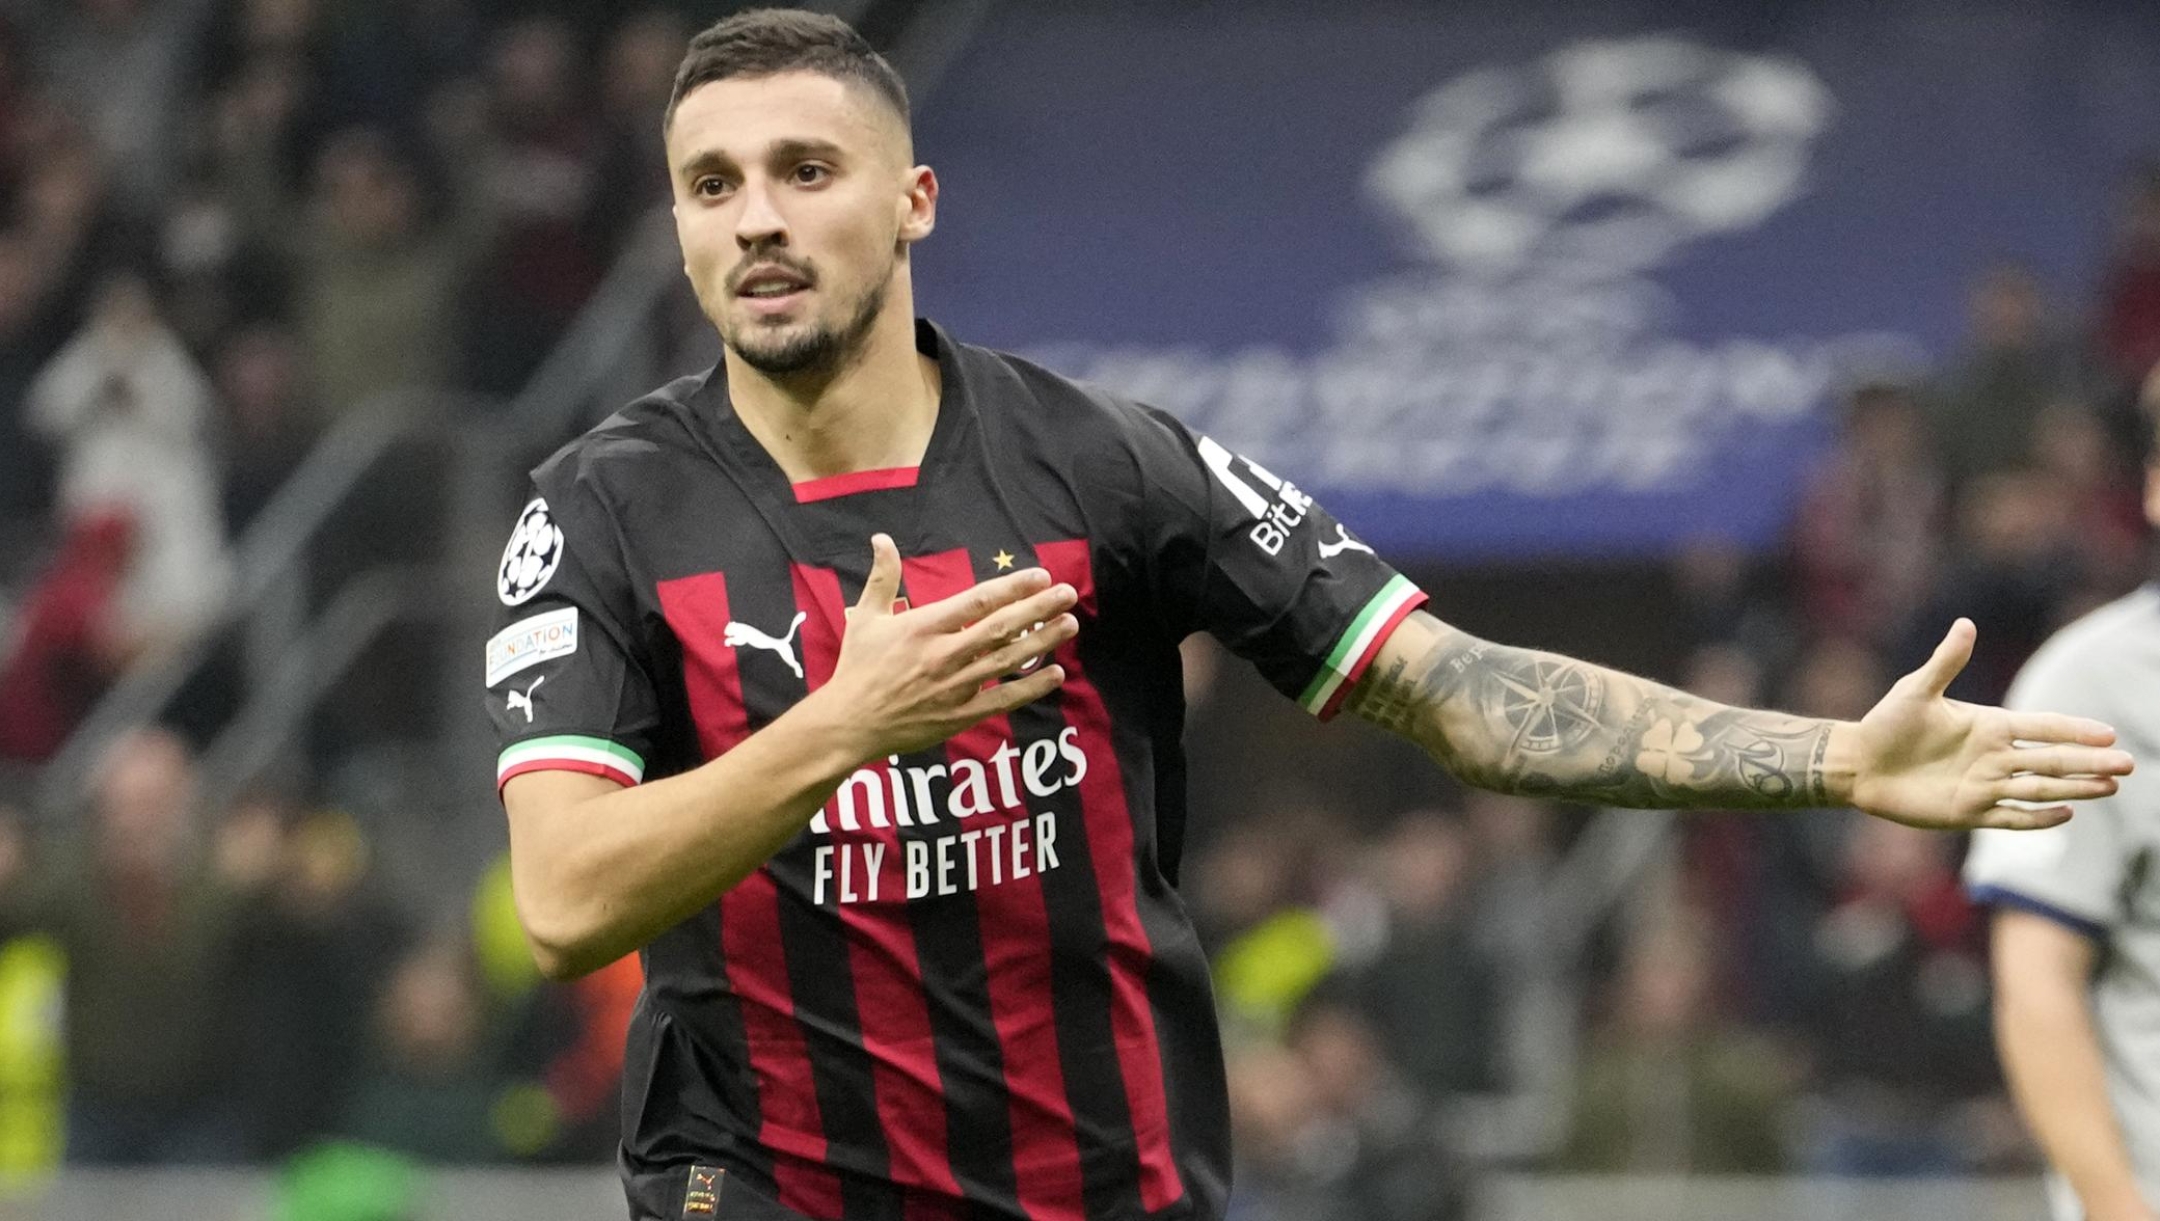 AC Milan's Rade Krunic celebrates after scoring his side's second goal during the Champions League, Group E soccer match between AC Milan and FC Salzburg, at the San Siro stadium in Milan, Italy, Wednesday, Nov. 2, 2022. (AP Photo/Luca Bruno)